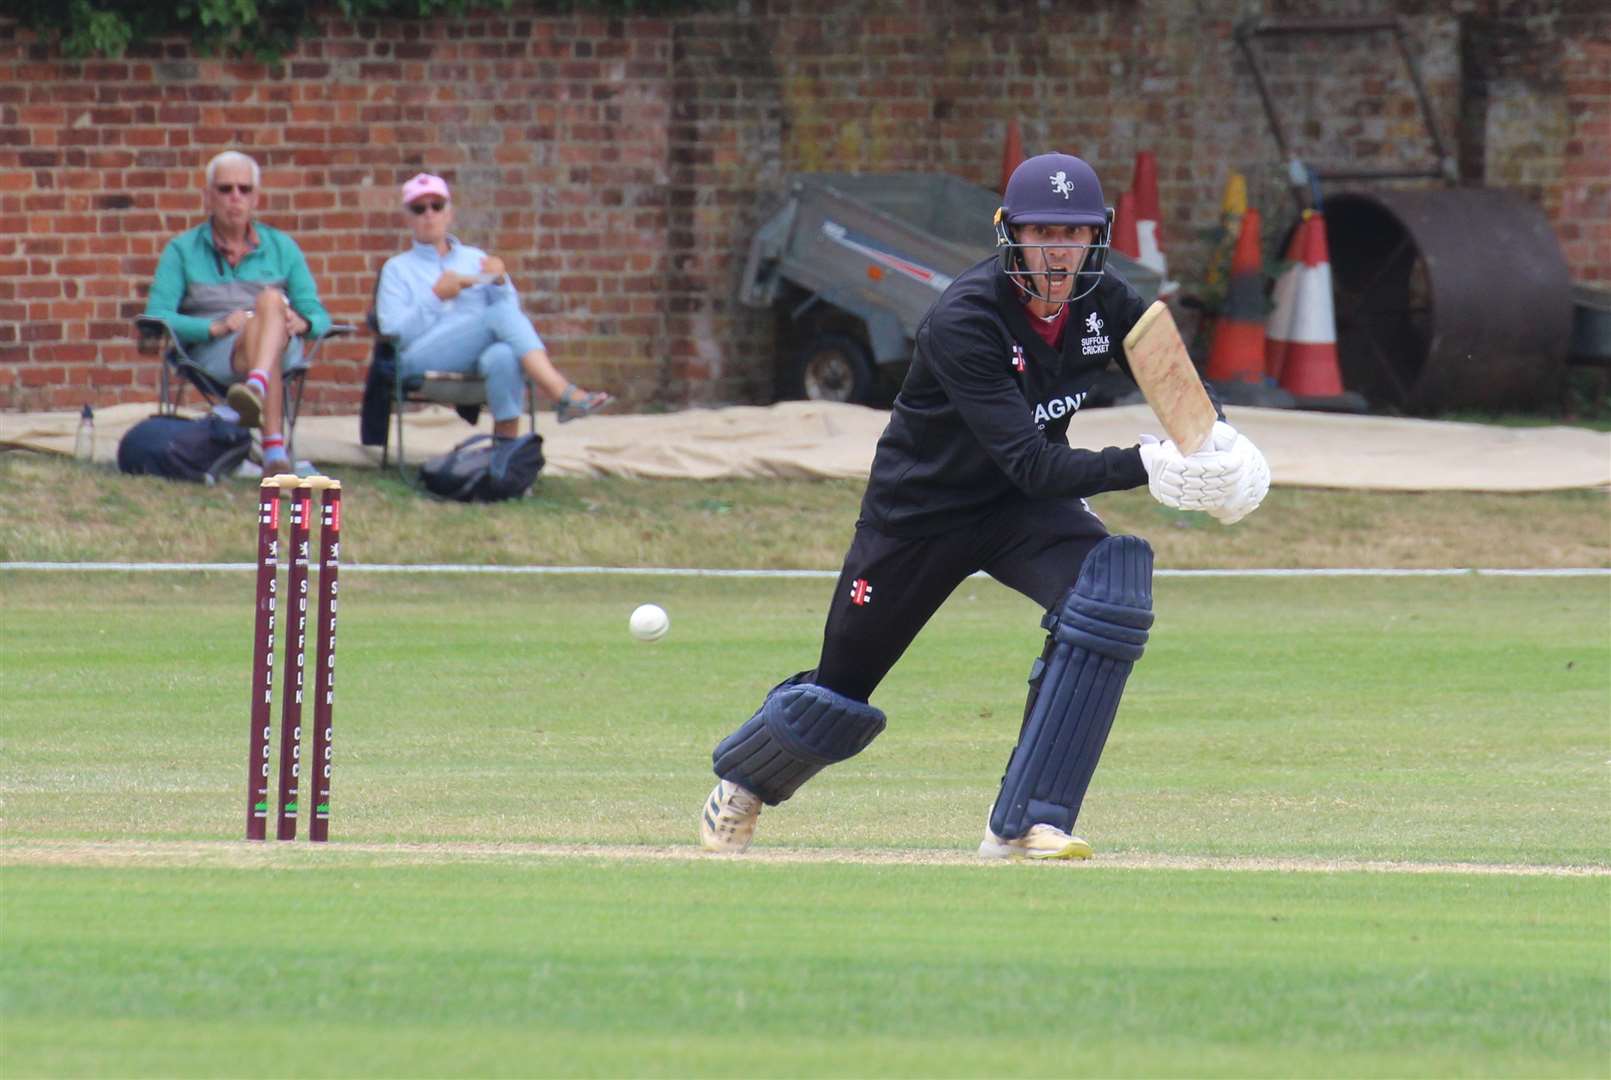 Adam Mansfield made 40 appearances for Suffolk in the National Counties (formerly Minor Counties) Championship Picture: Nick Garnham